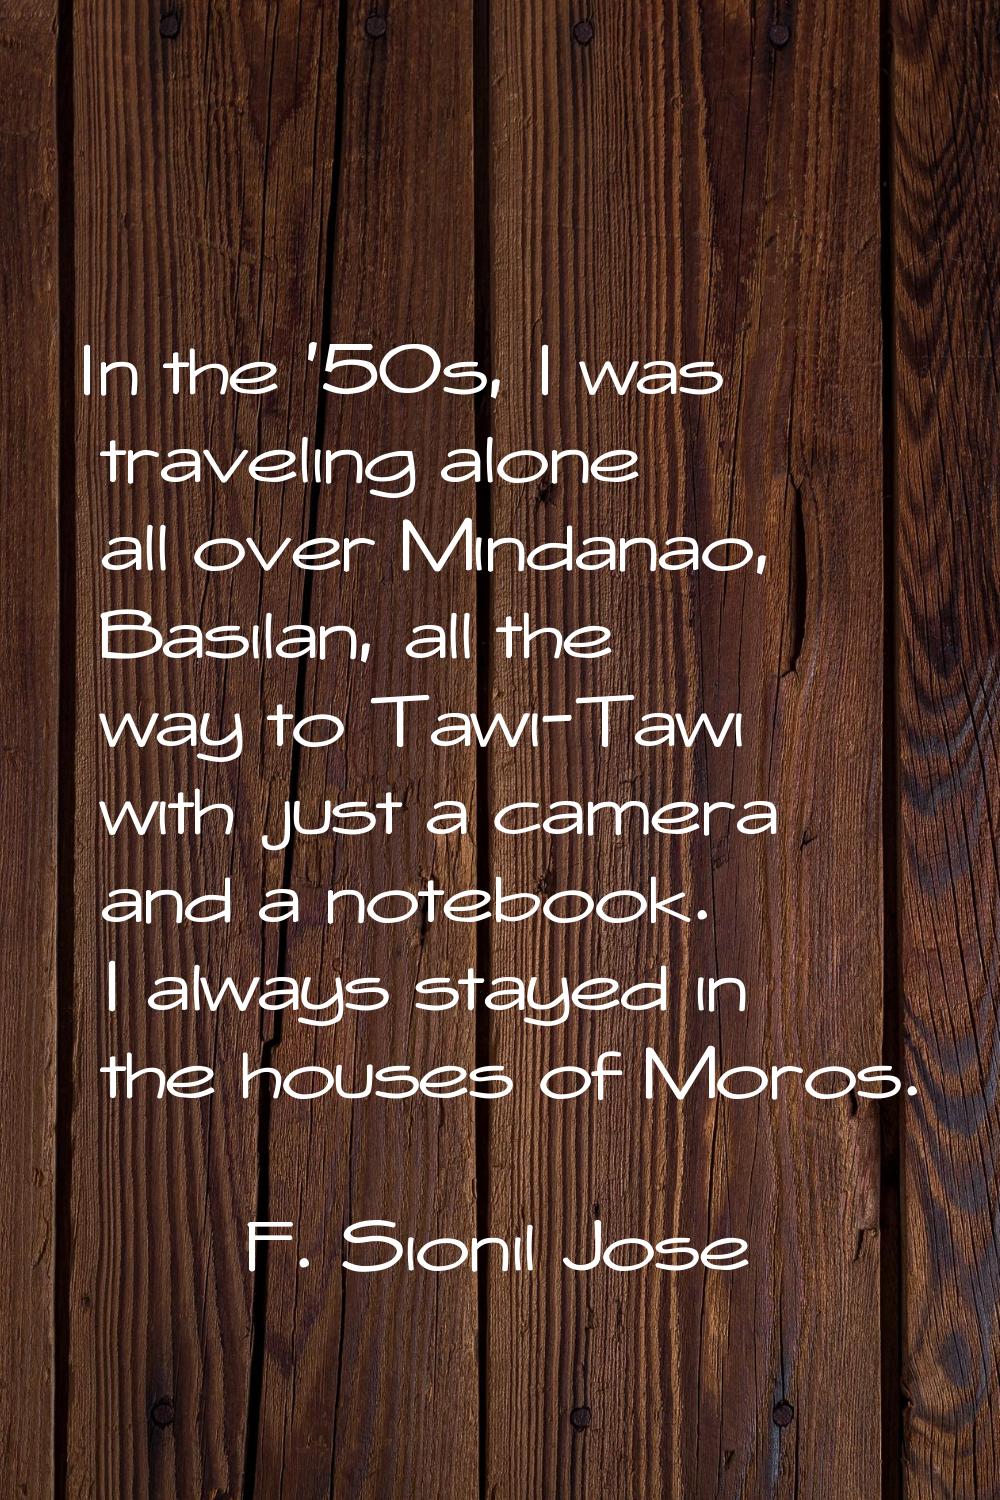 In the '50s, I was traveling alone all over Mindanao, Basilan, all the way to Tawi-Tawi with just a